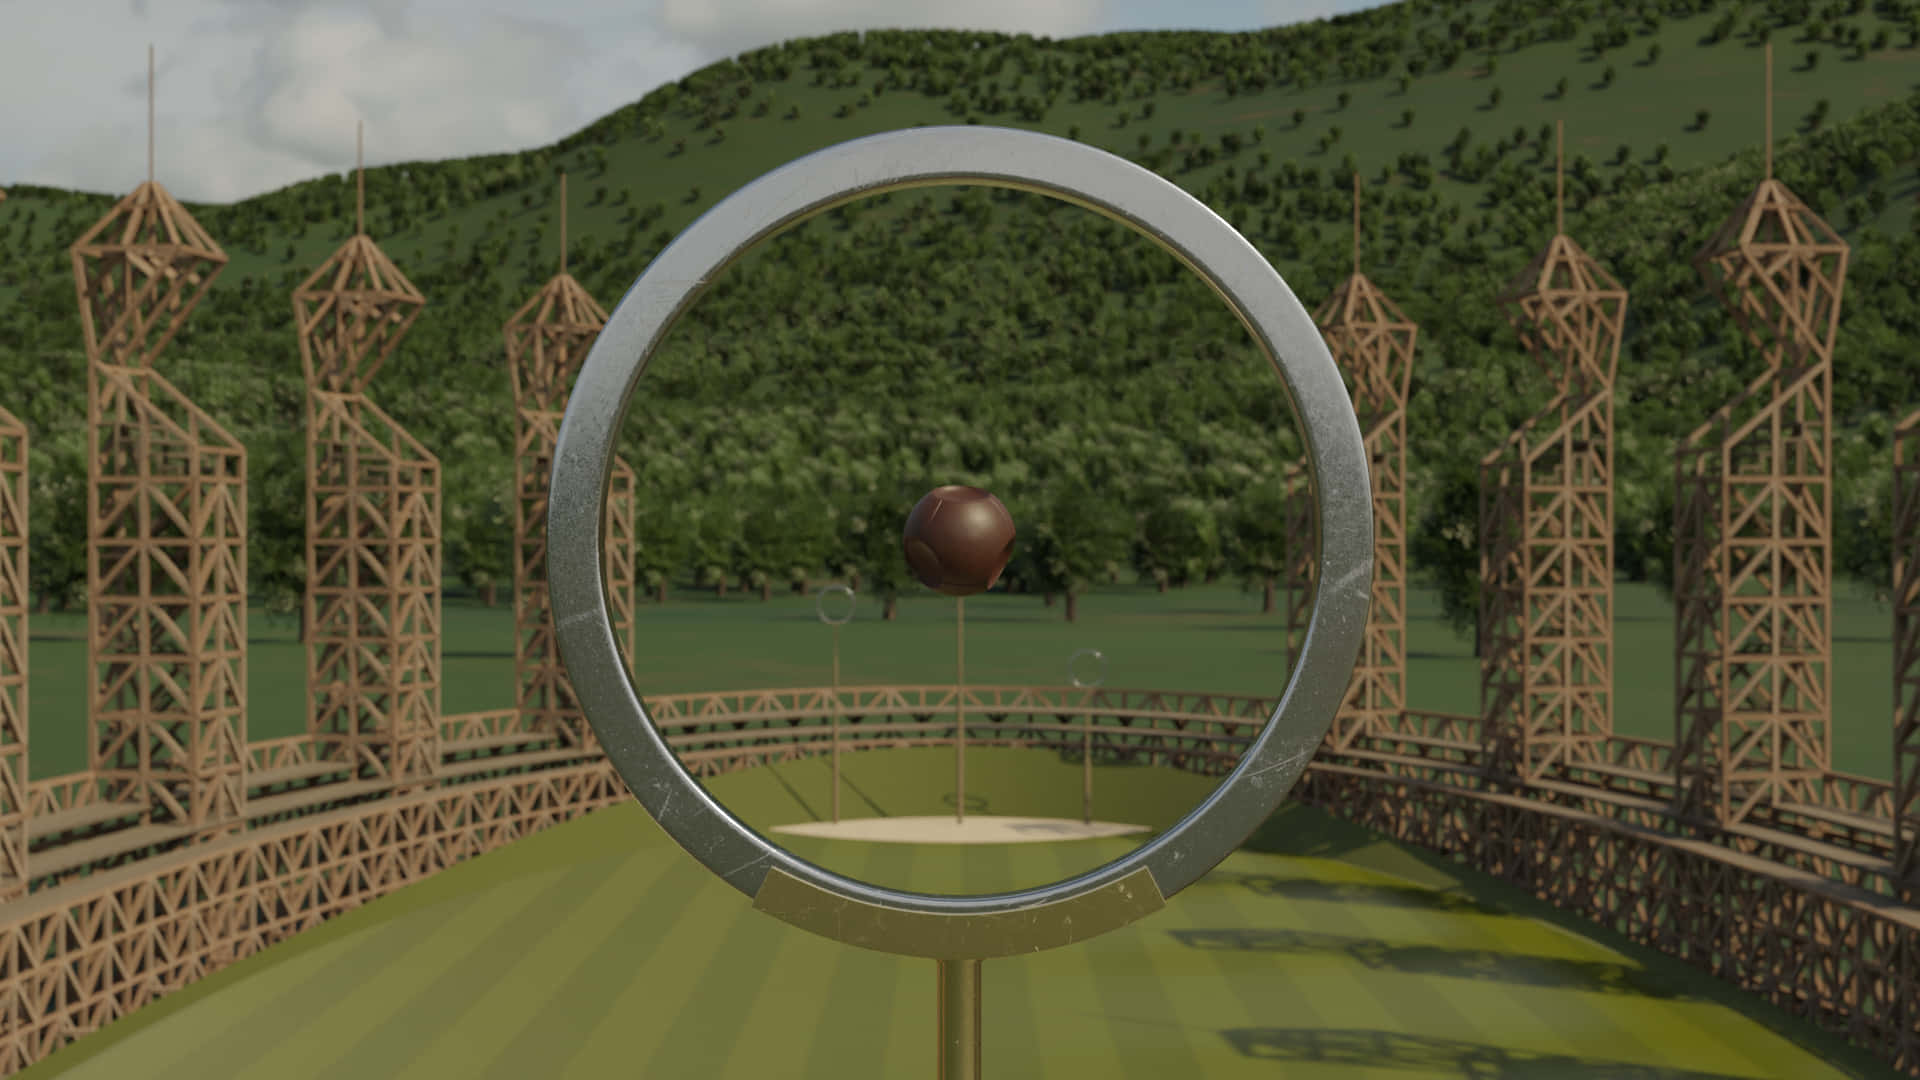 The Hogwarts Quidditch Pitch as Seen in the Harry Potter Films Wallpaper